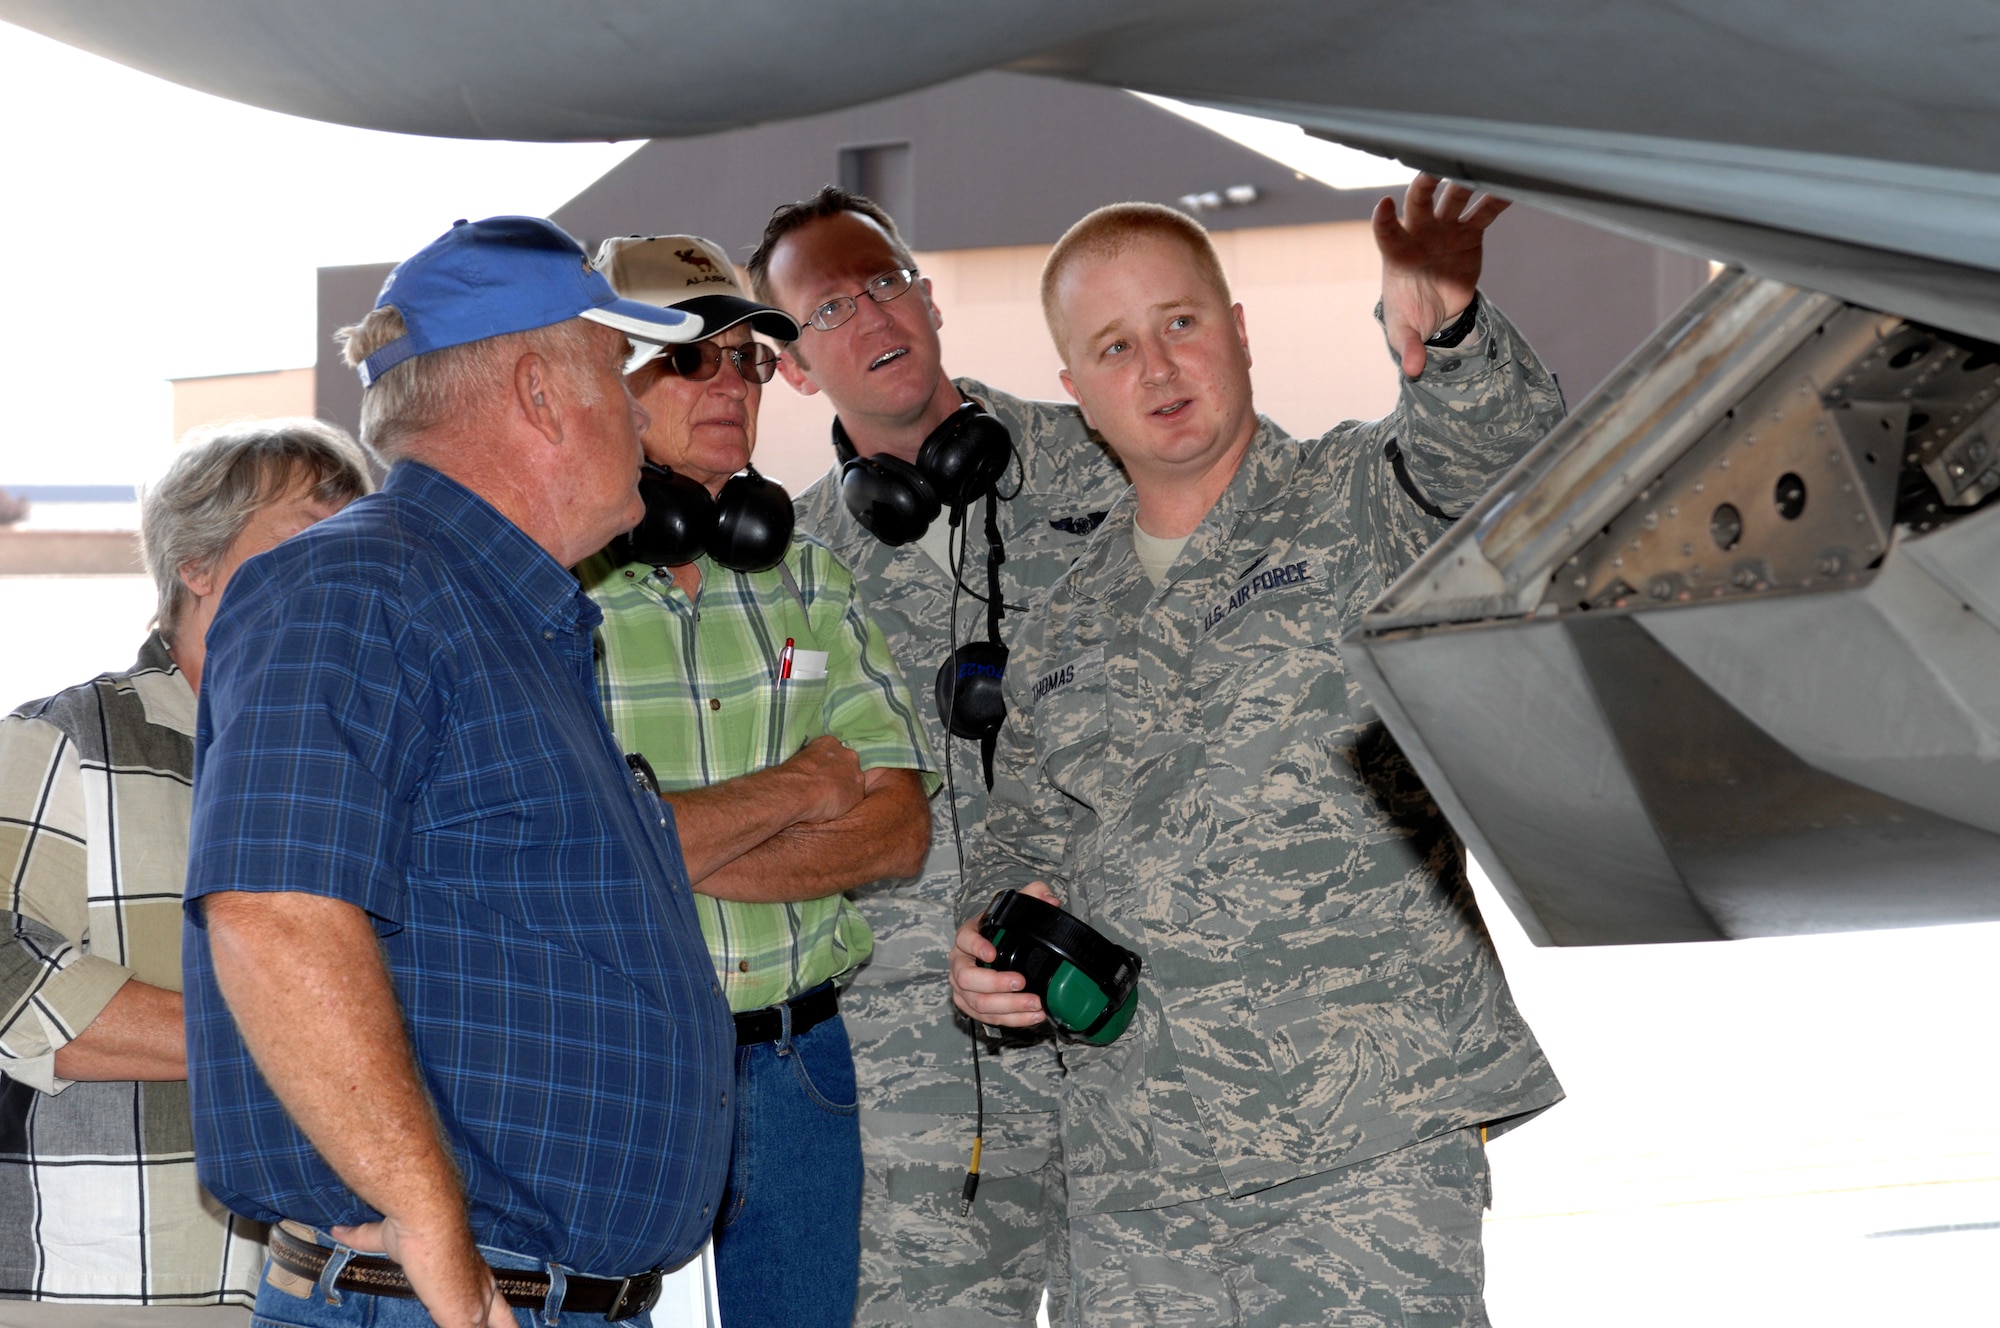 Tech. Sgt. Dennis Thomas, 49th Aircraft Maintenance Squadron, explains features of the F-22A Raptor to former crew chiefs with the 8th Fighter Squadron at Holloman Air Force Base, N.M., September 26. The six veterans and their family were touring Holloman in commemoration of their 40th reunion. (U.S. Air Force photo/Airman Sondra M. Escutia)